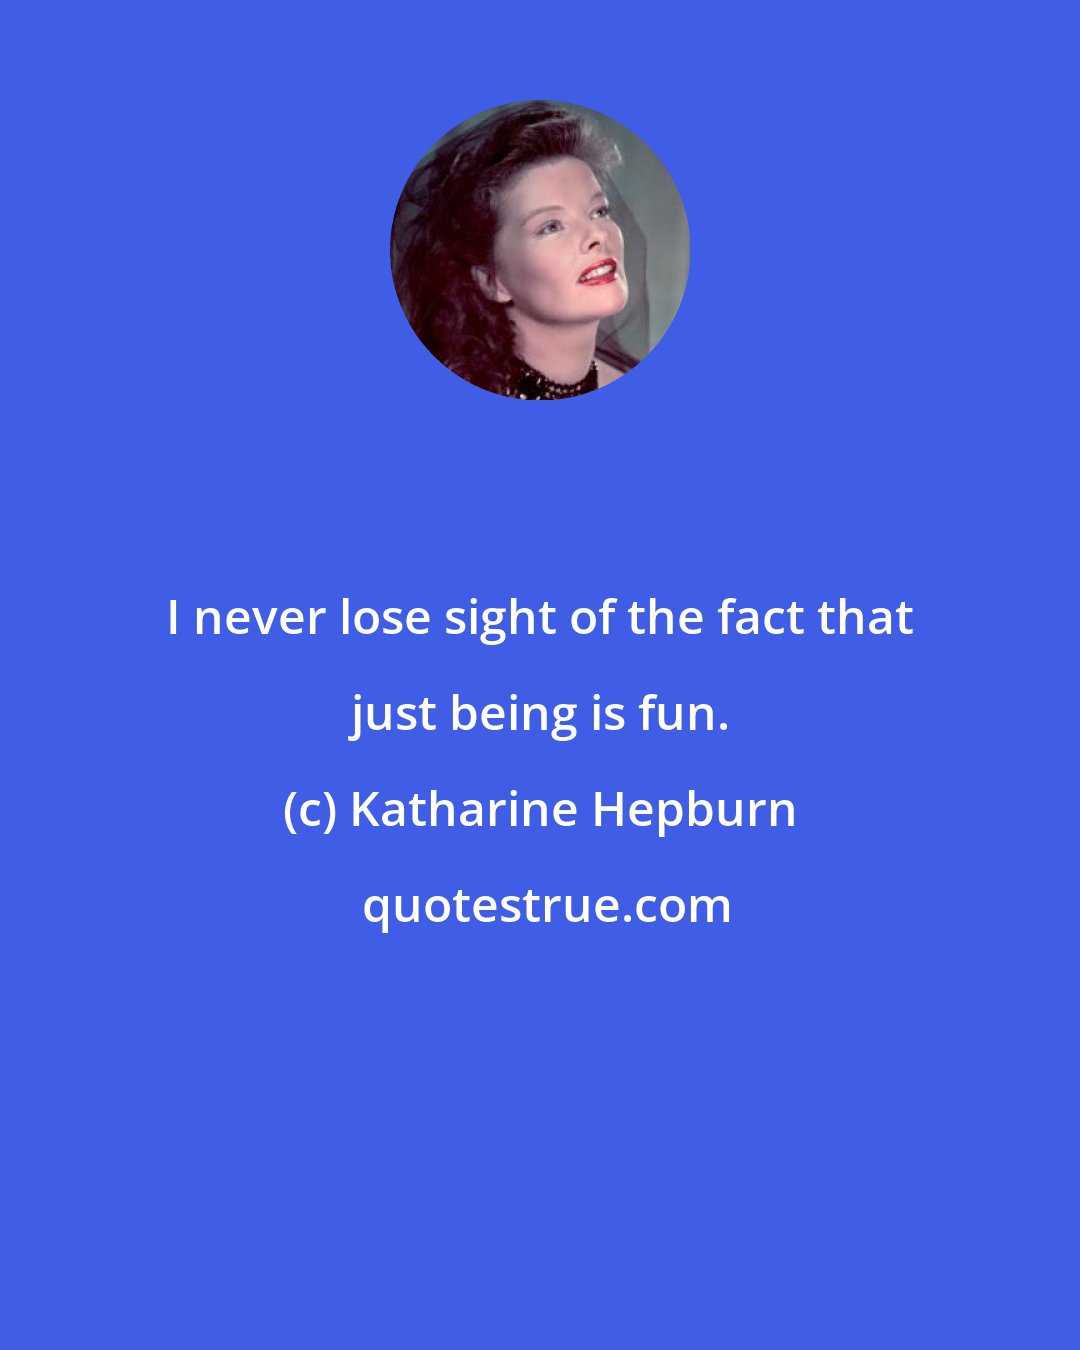 Katharine Hepburn: I never lose sight of the fact that just being is fun.